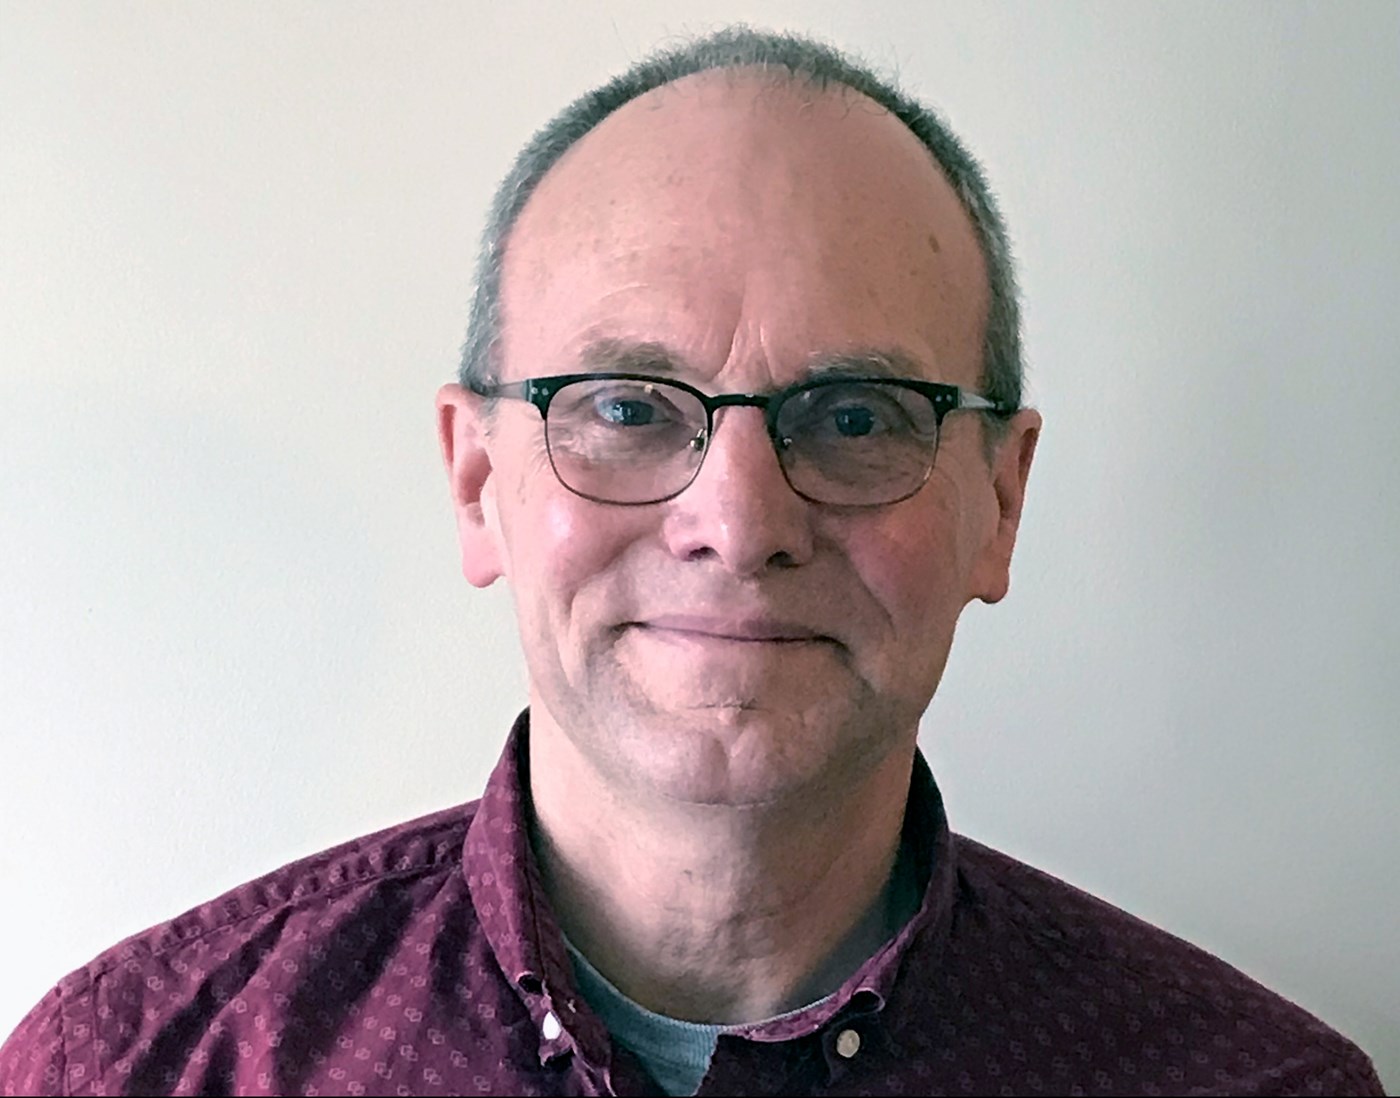 Thomas Estabrook is the Project Director / Co-Principal Investigator in the The New England Consortium, Community Health & Sustainability, Climate Change Initiative all at UMass Lowell.